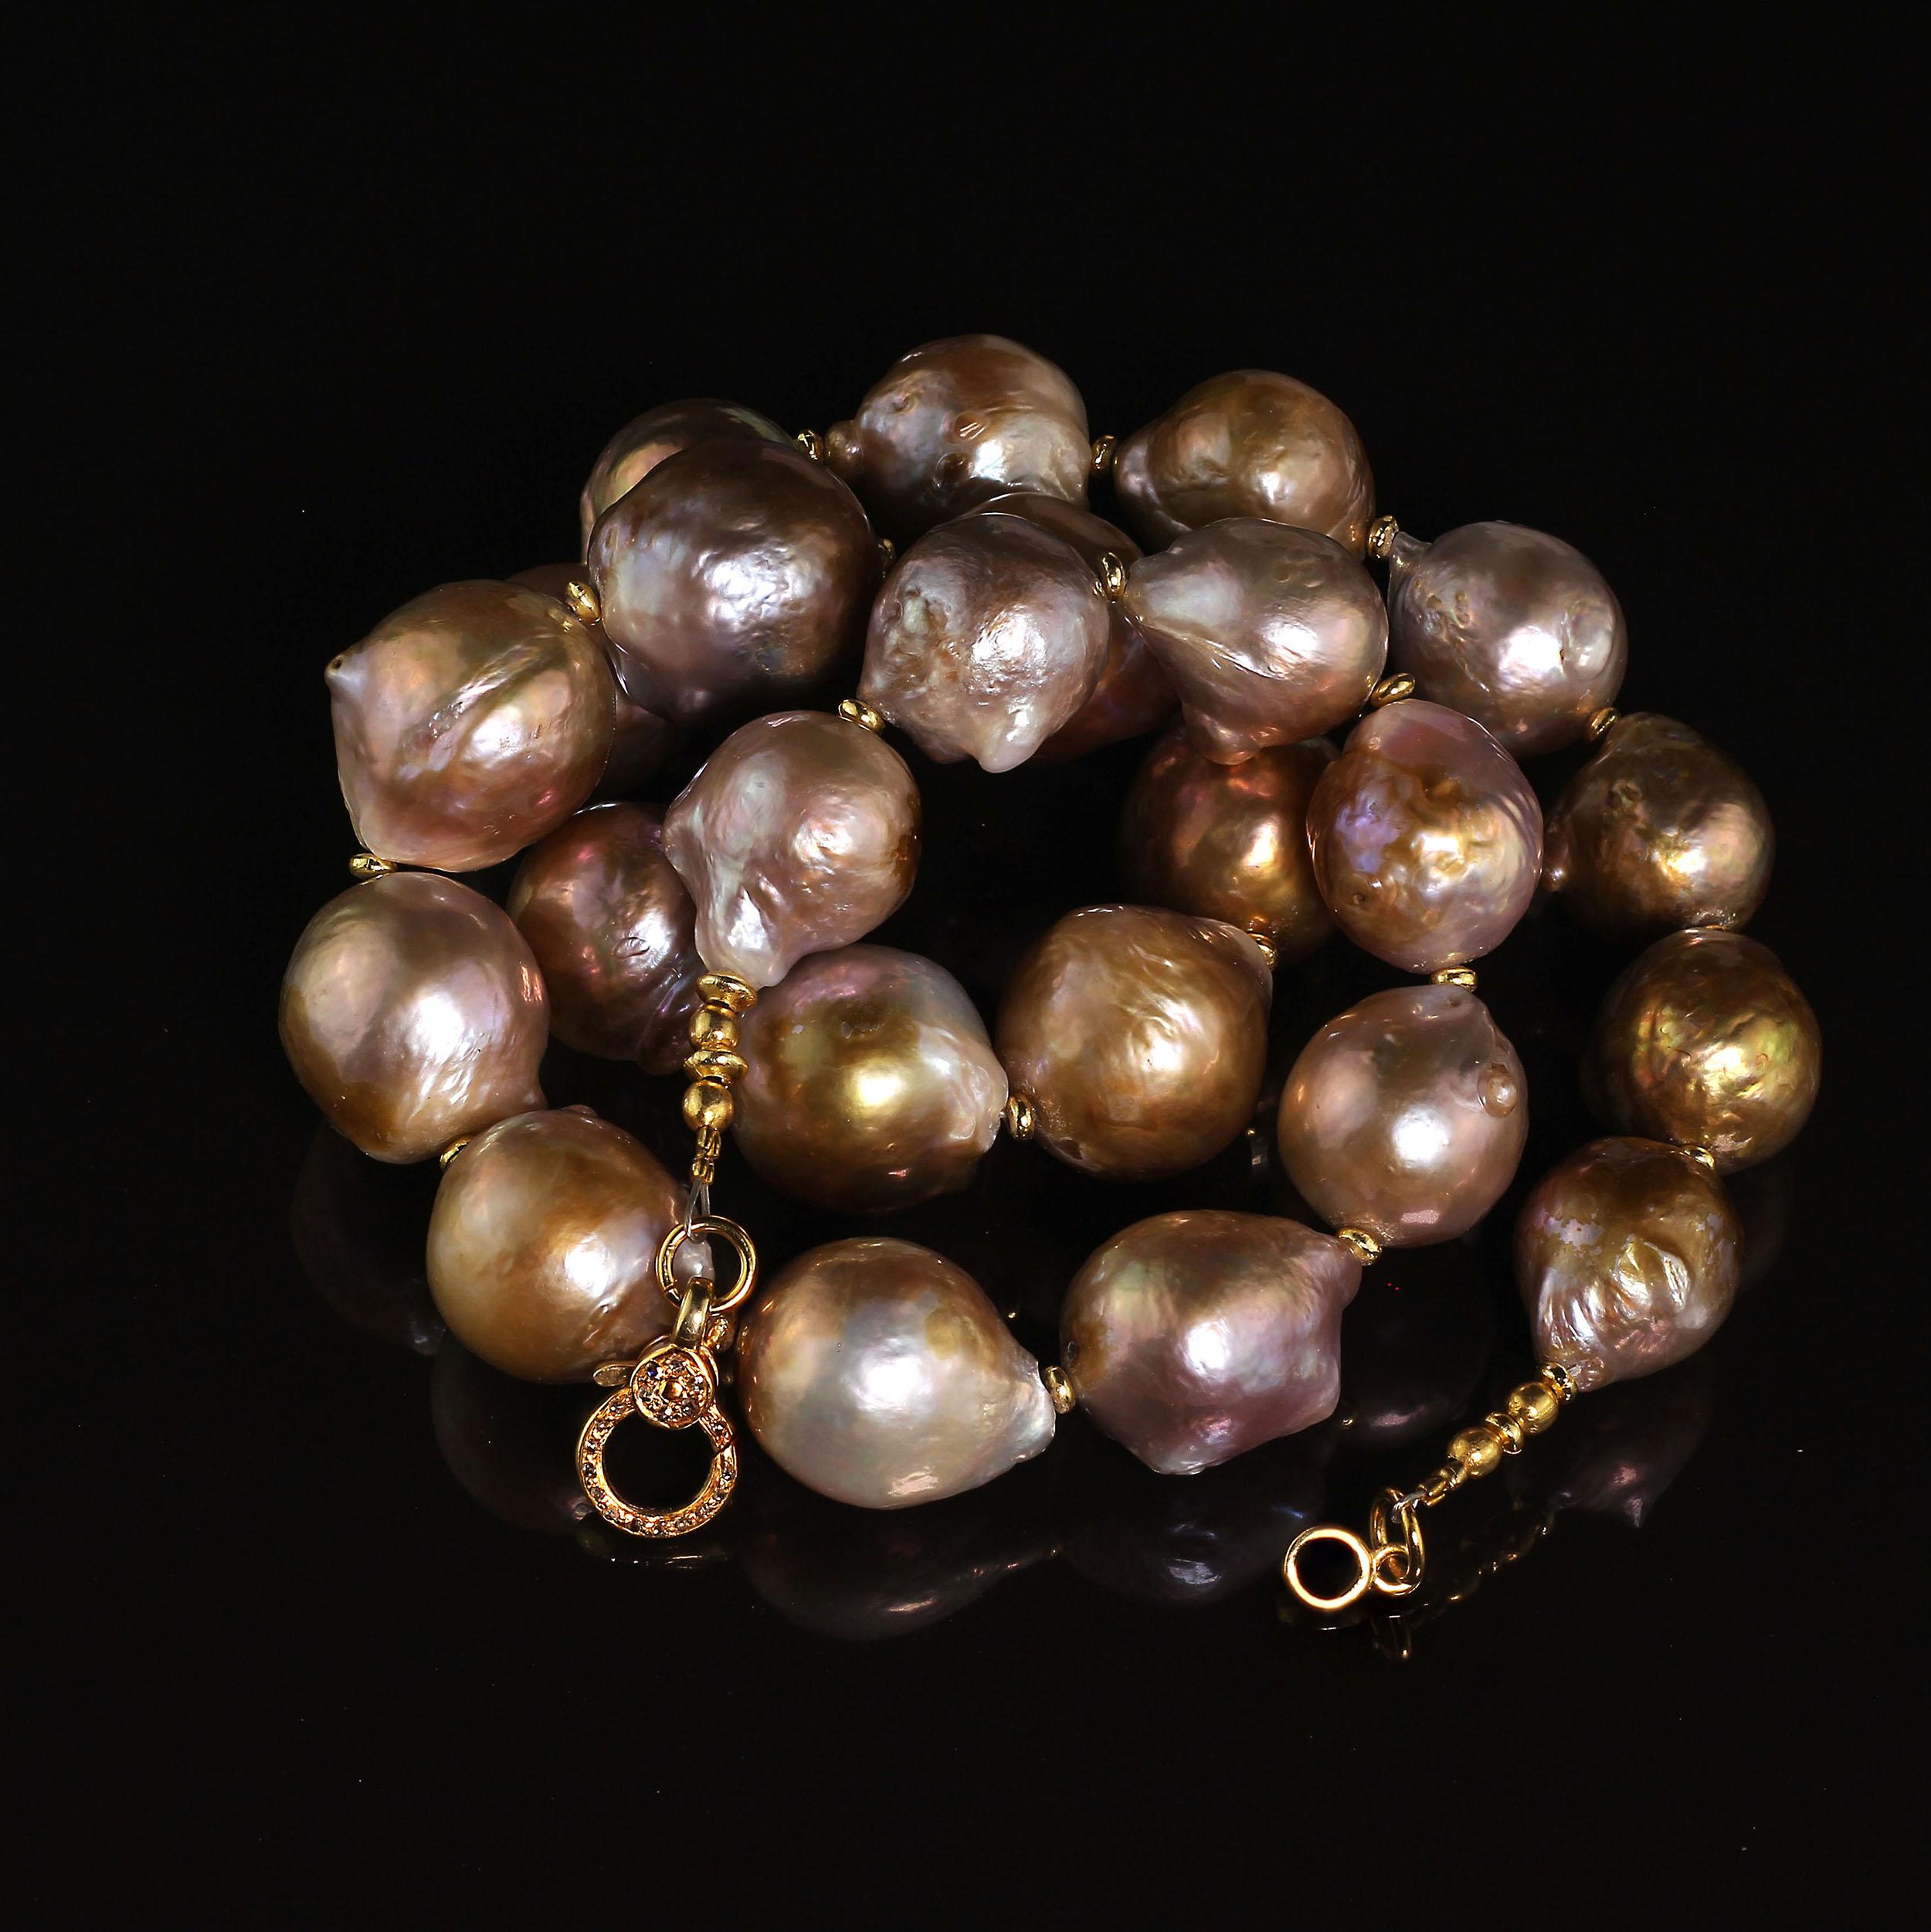 Glamorous Iridescent Wrinkle Pearl Necklace from Gemjunky 2